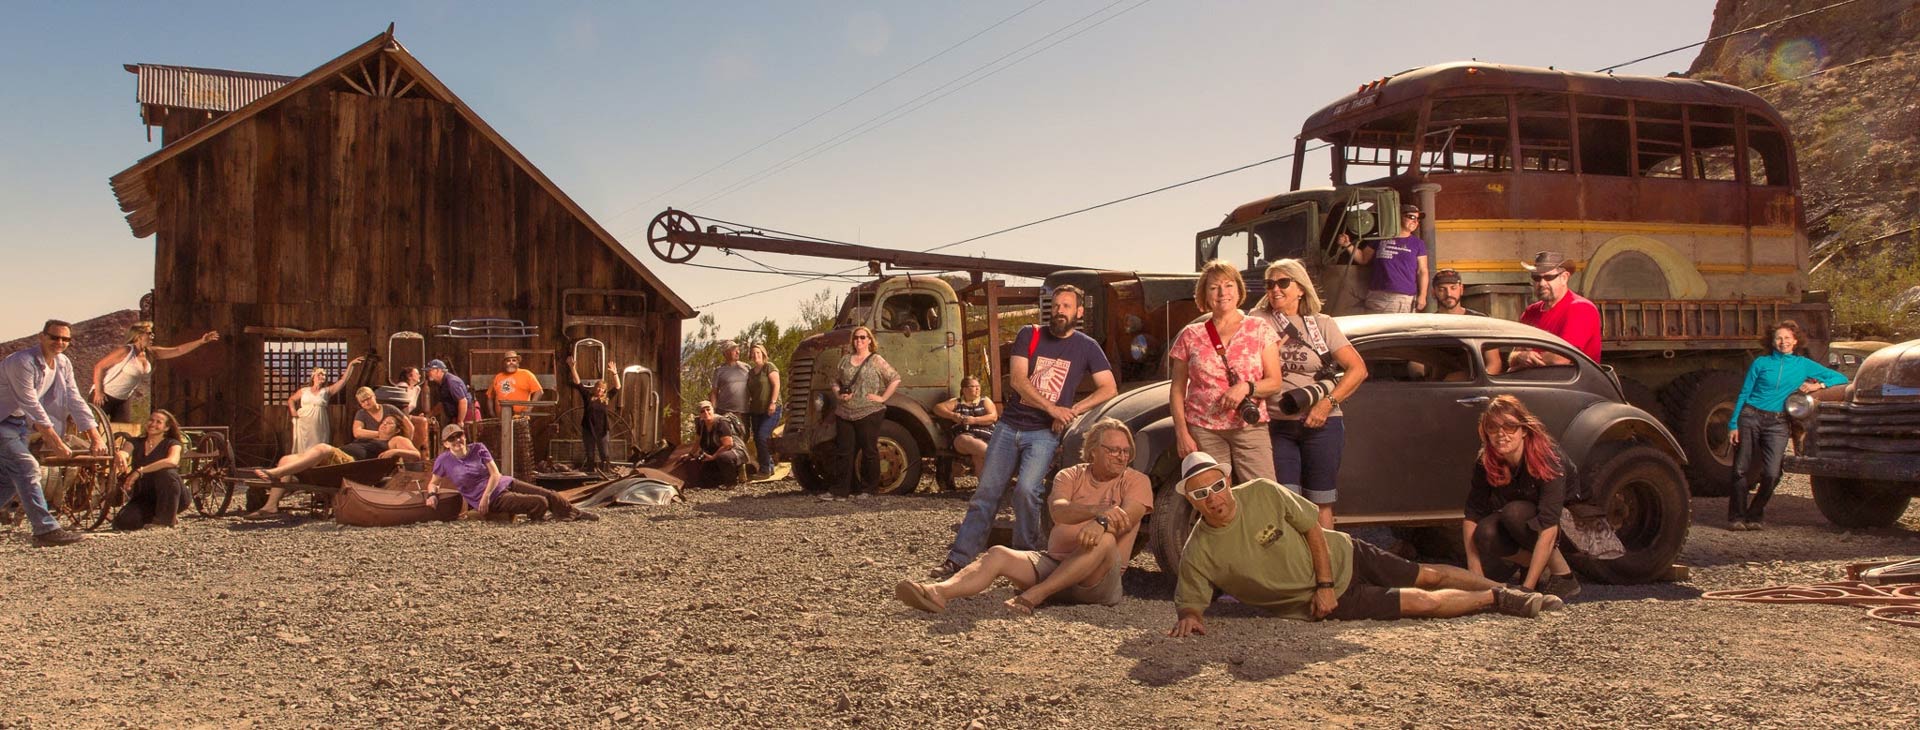 Group of Photographers arrayed across a desert mining town in Nelson NV